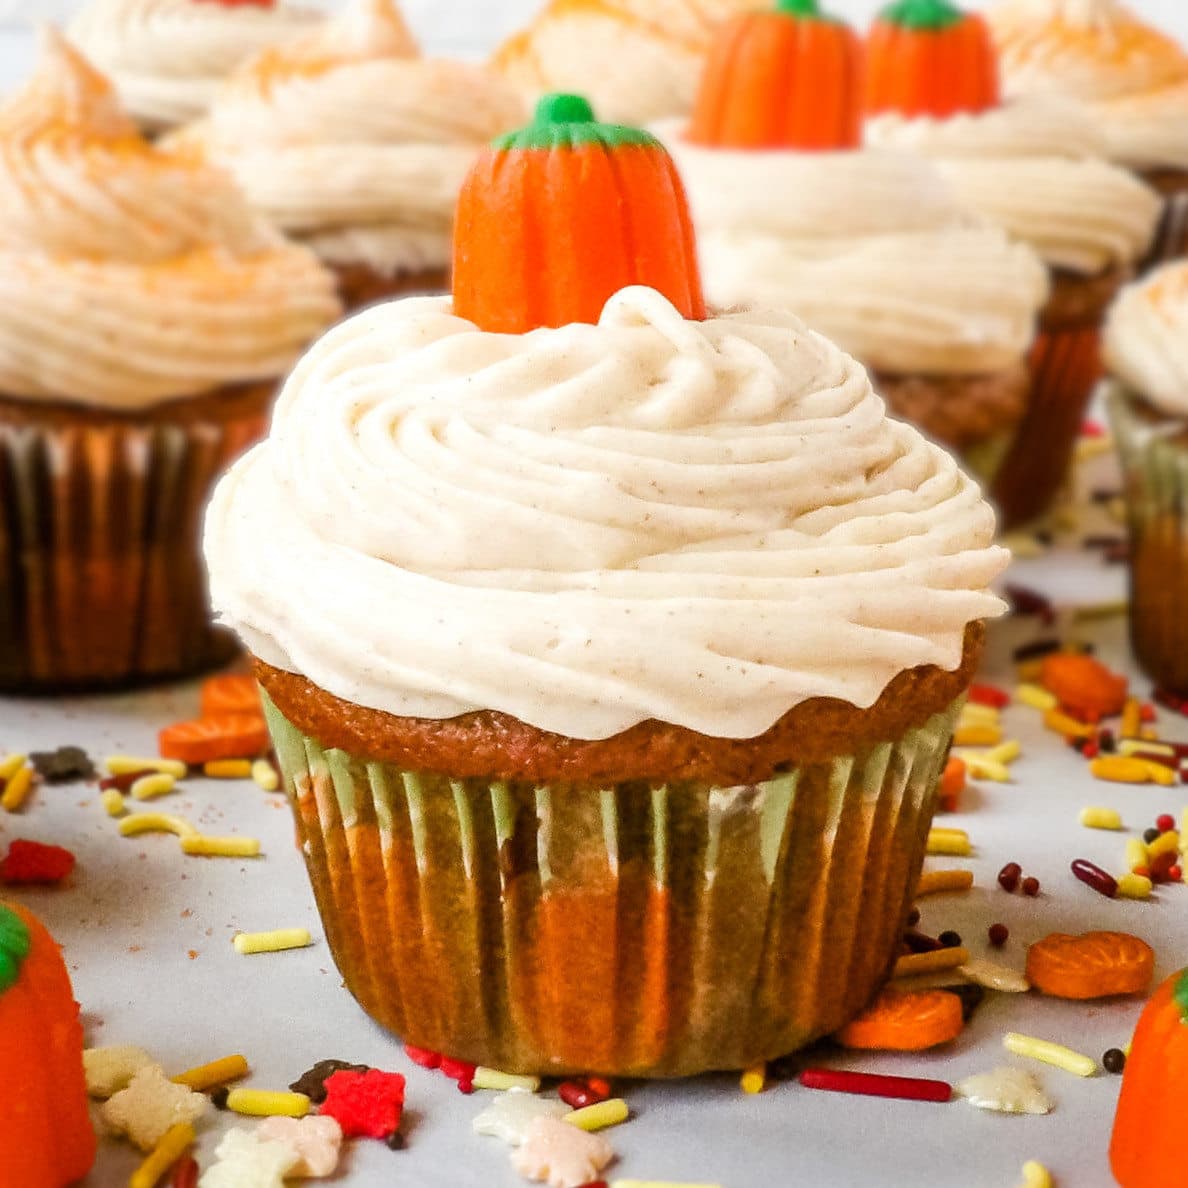 Pumpkin cupcakes with cinnamon cream cheese frosting decorated with candy pumpkins and fall sprinkles.